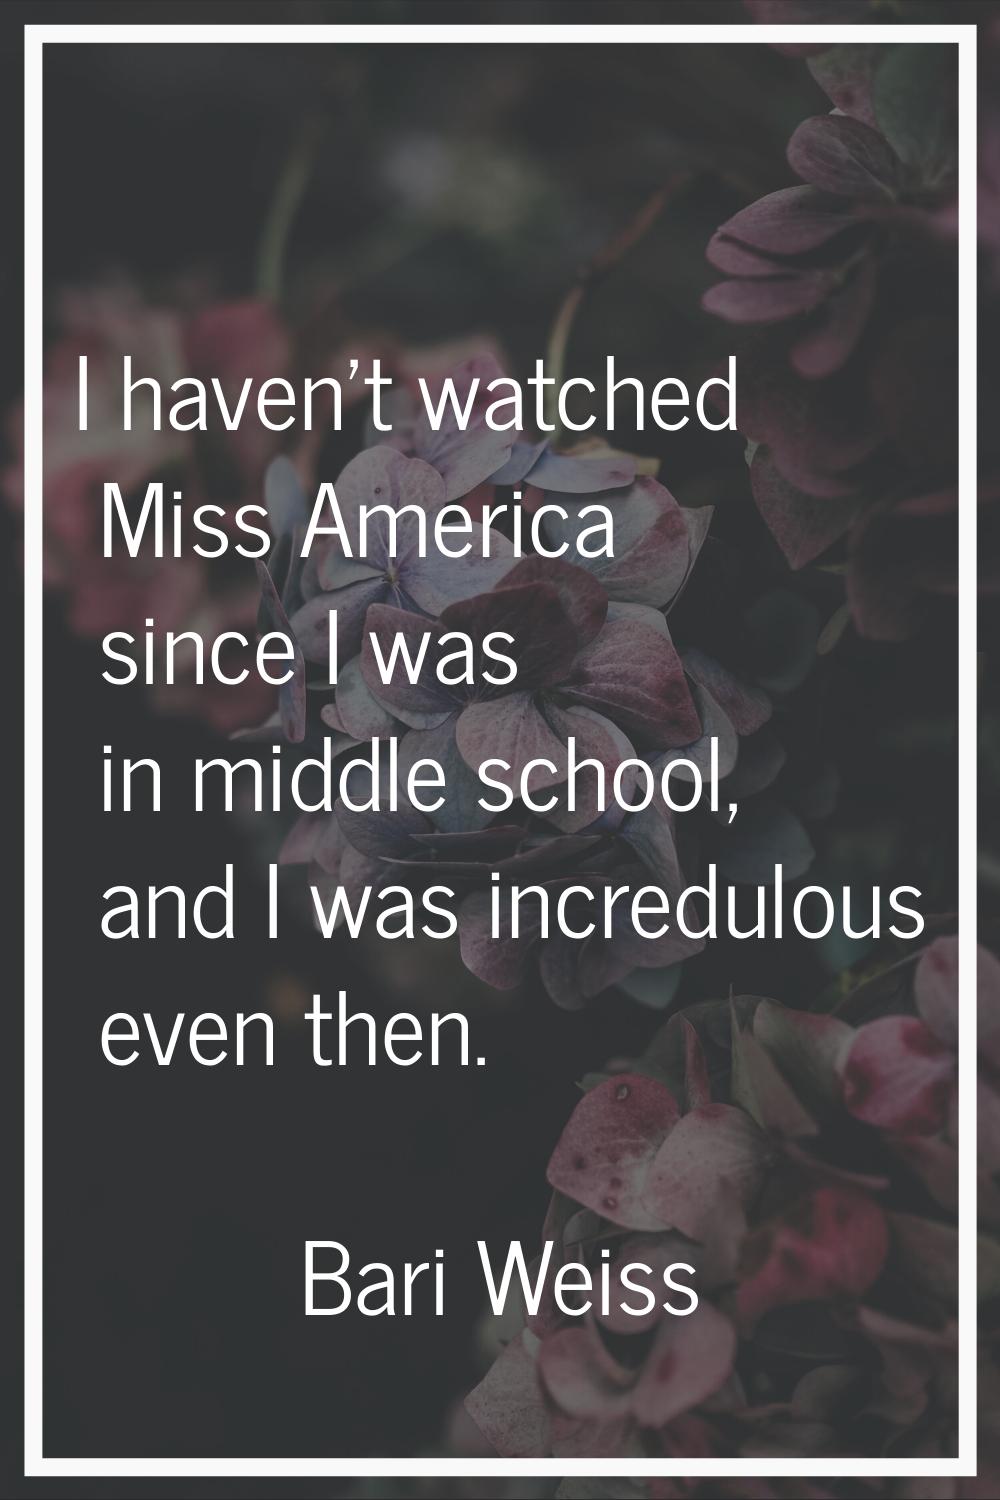 I haven't watched Miss America since I was in middle school, and I was incredulous even then.